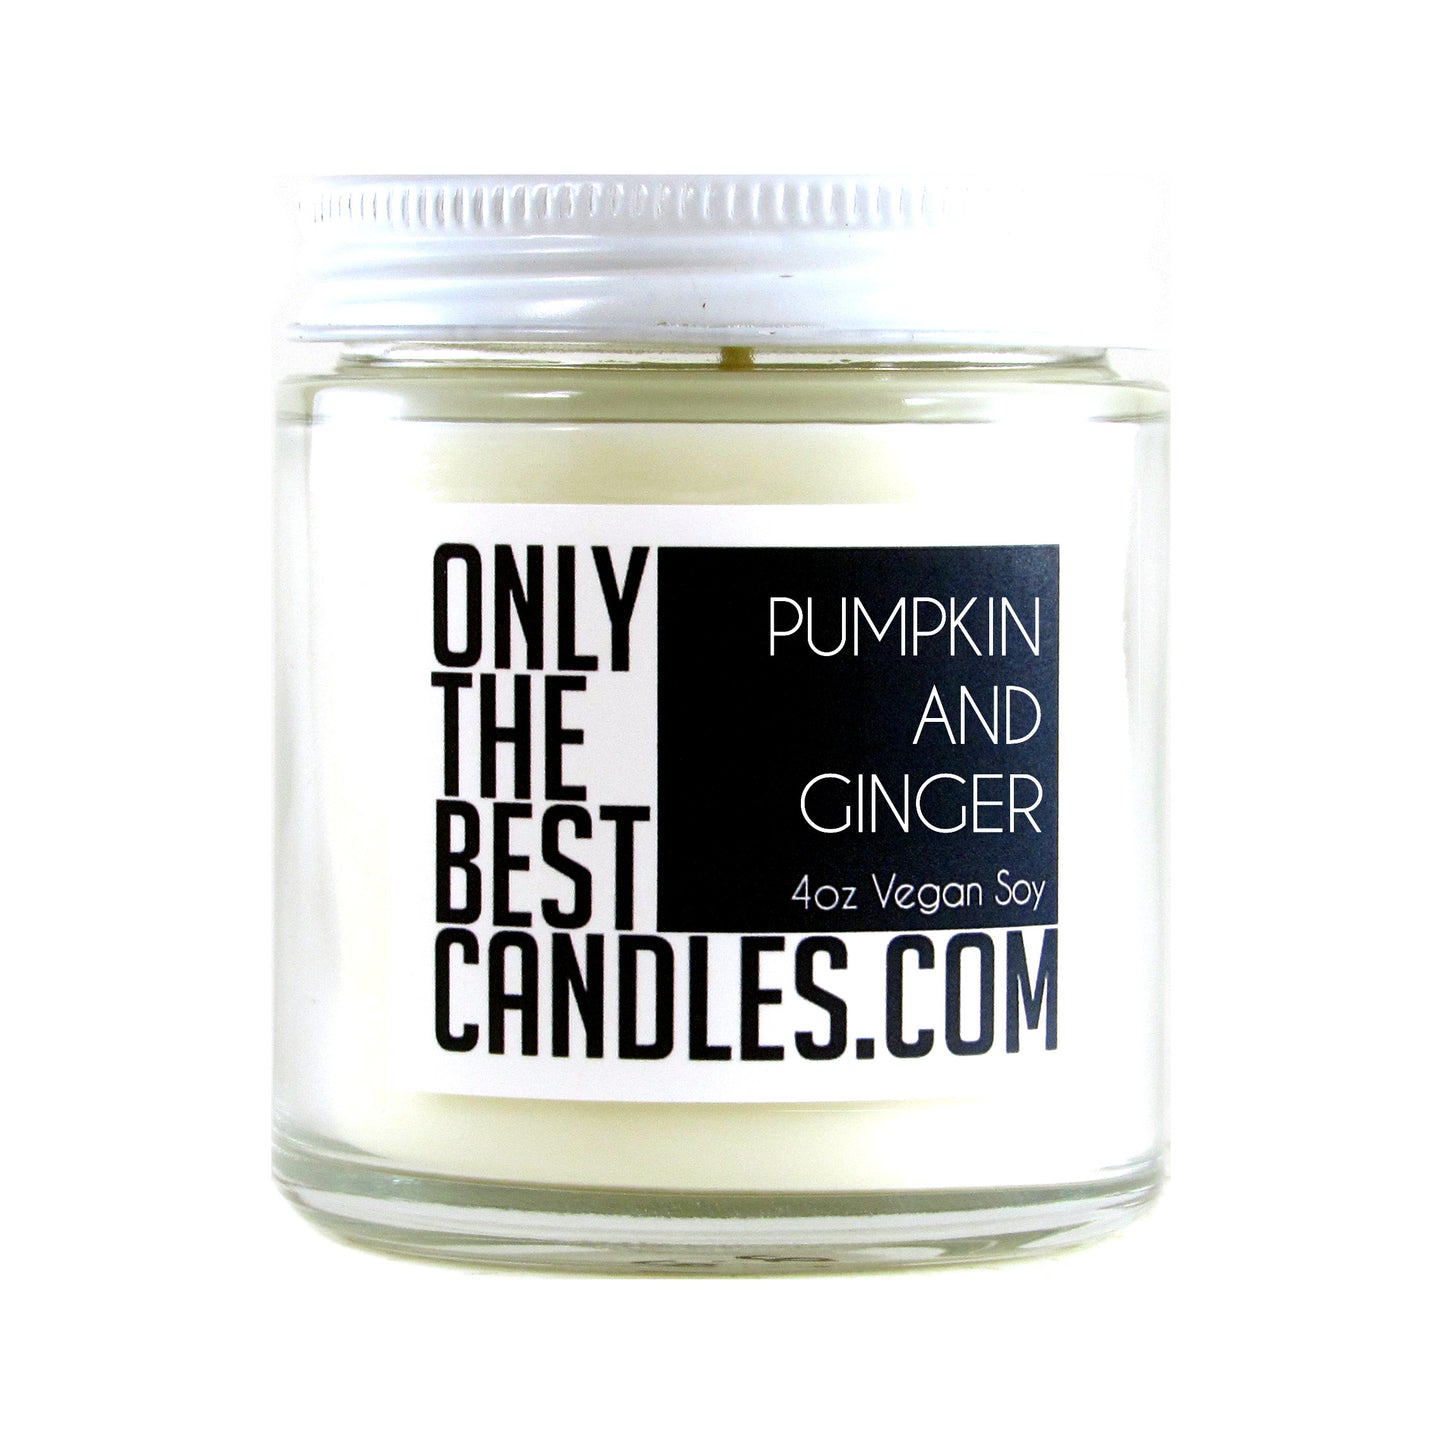 Pumpkin and Ginger 4oz Candle